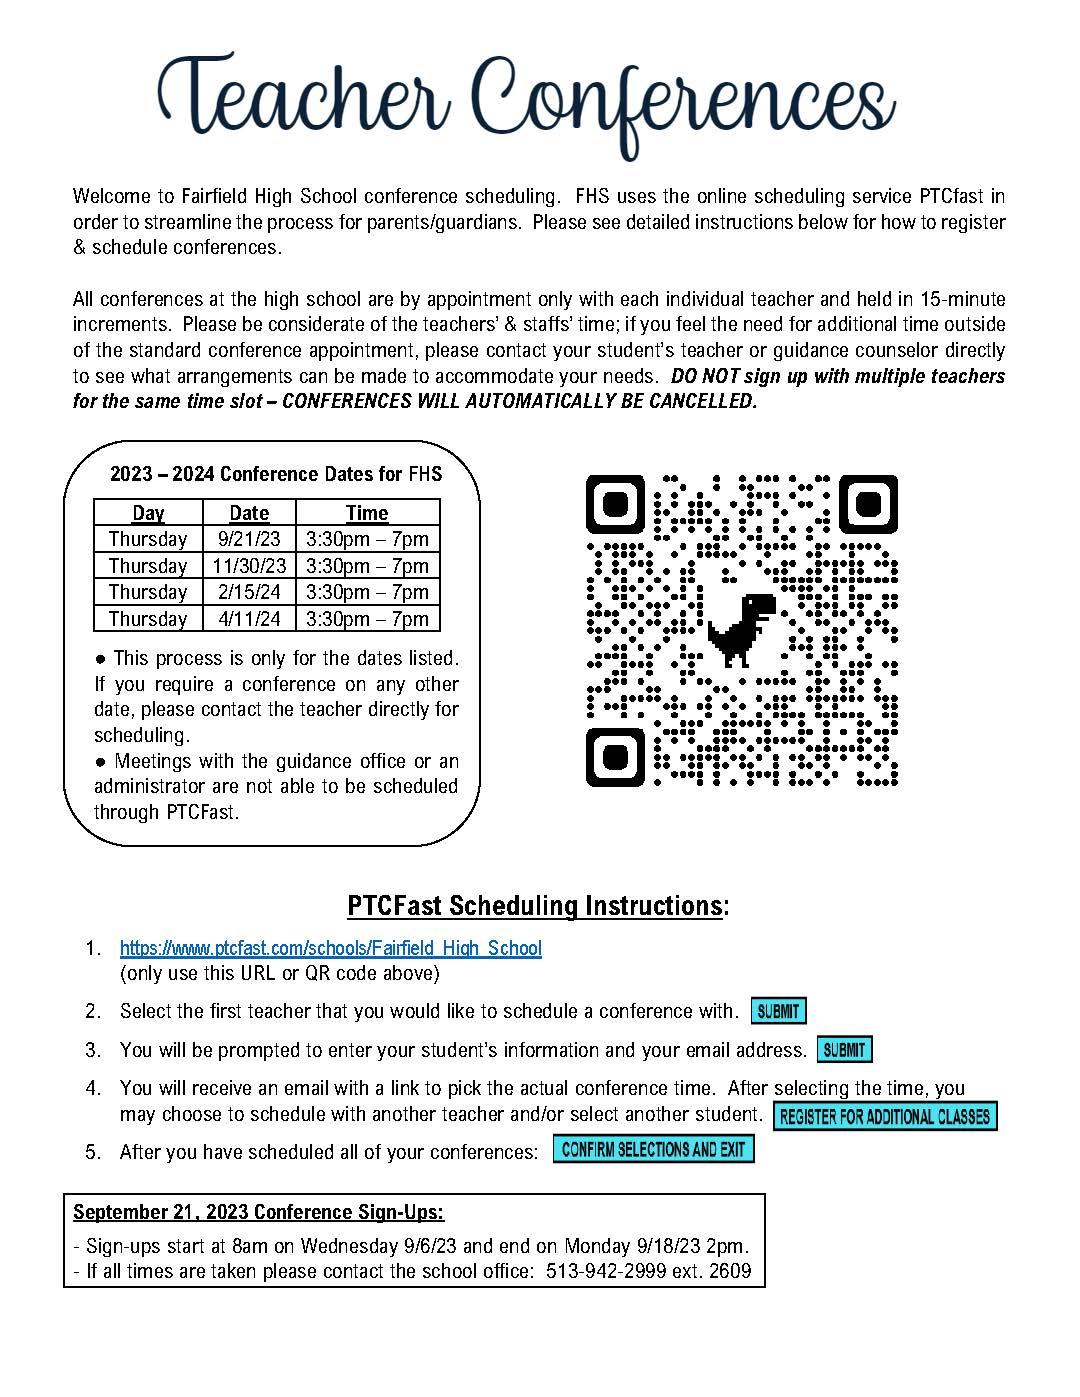 Fairfield High School Conference Instructions Flyer